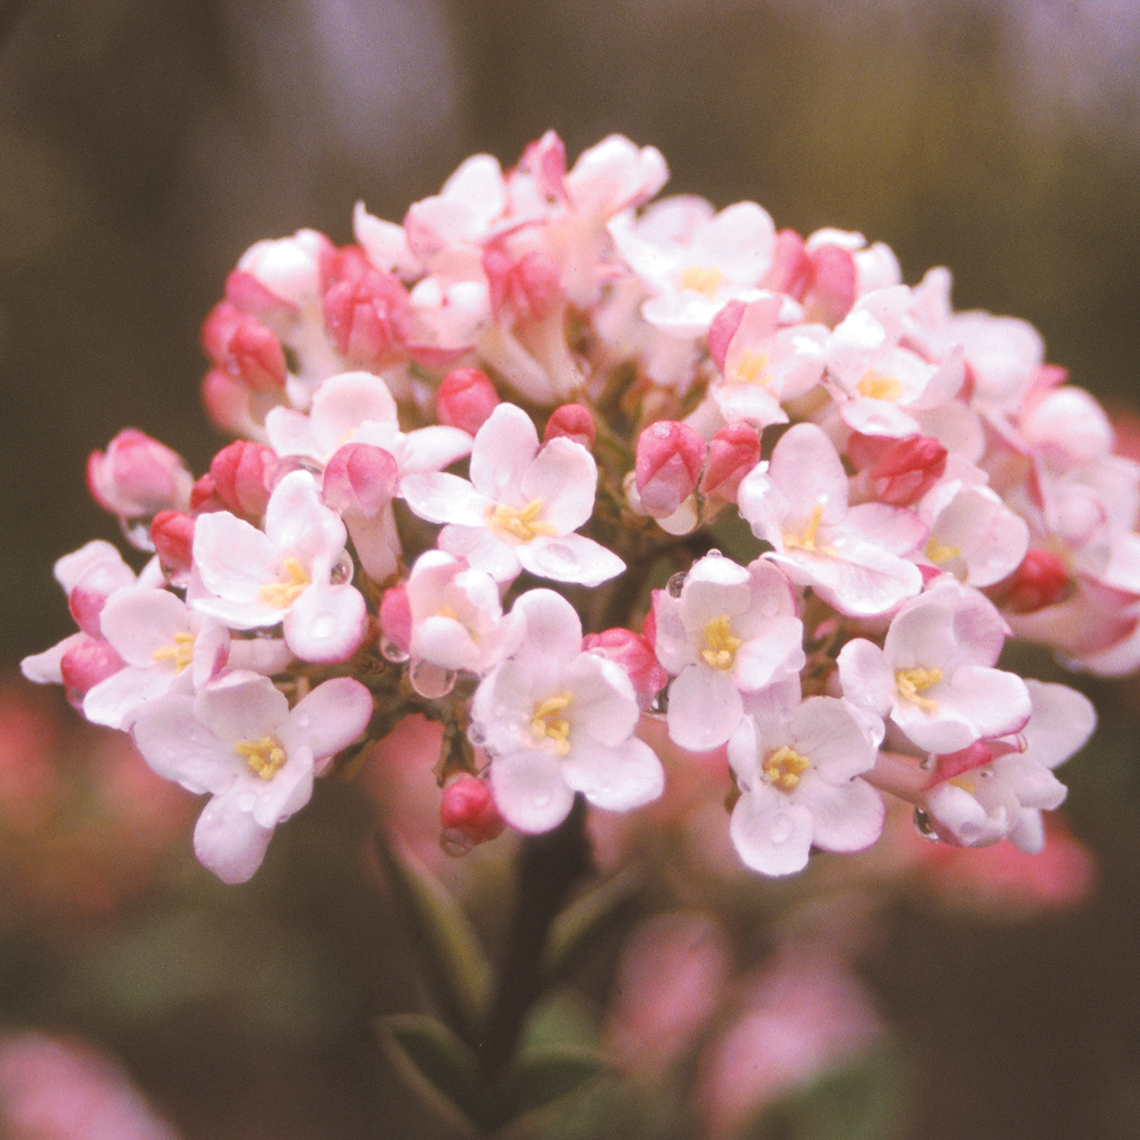 Closeup of the white and pink flowers of Mohawk viburnum each with five petals